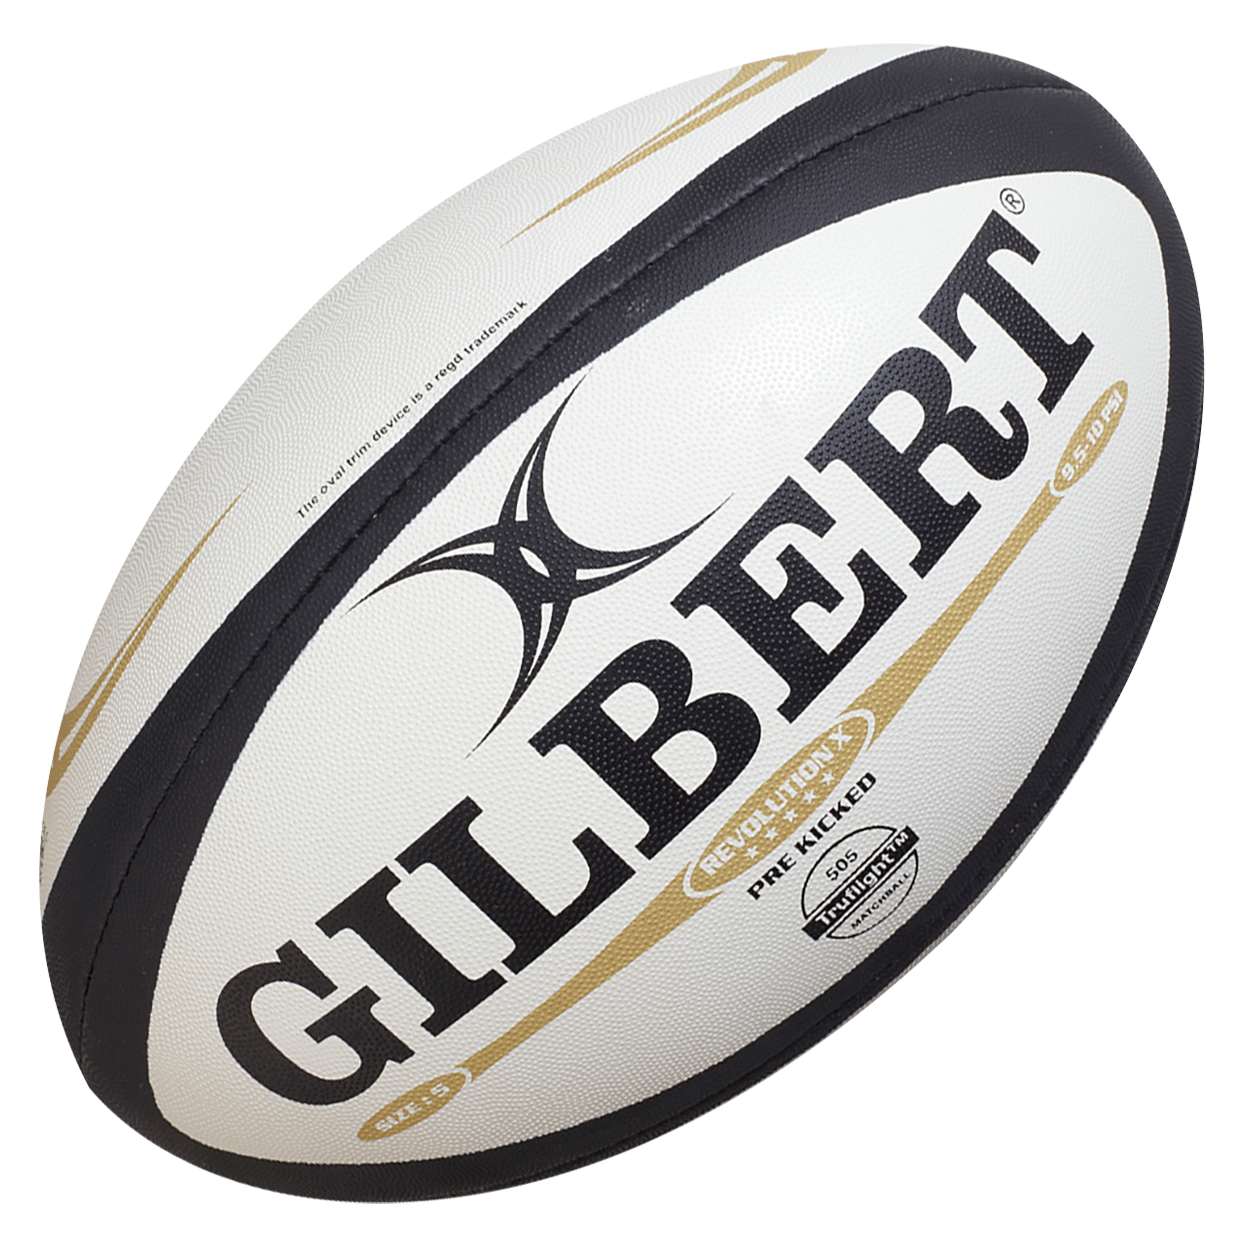 Rugby Imports Gilbert Revolution X Truflight Match Rugby Ball